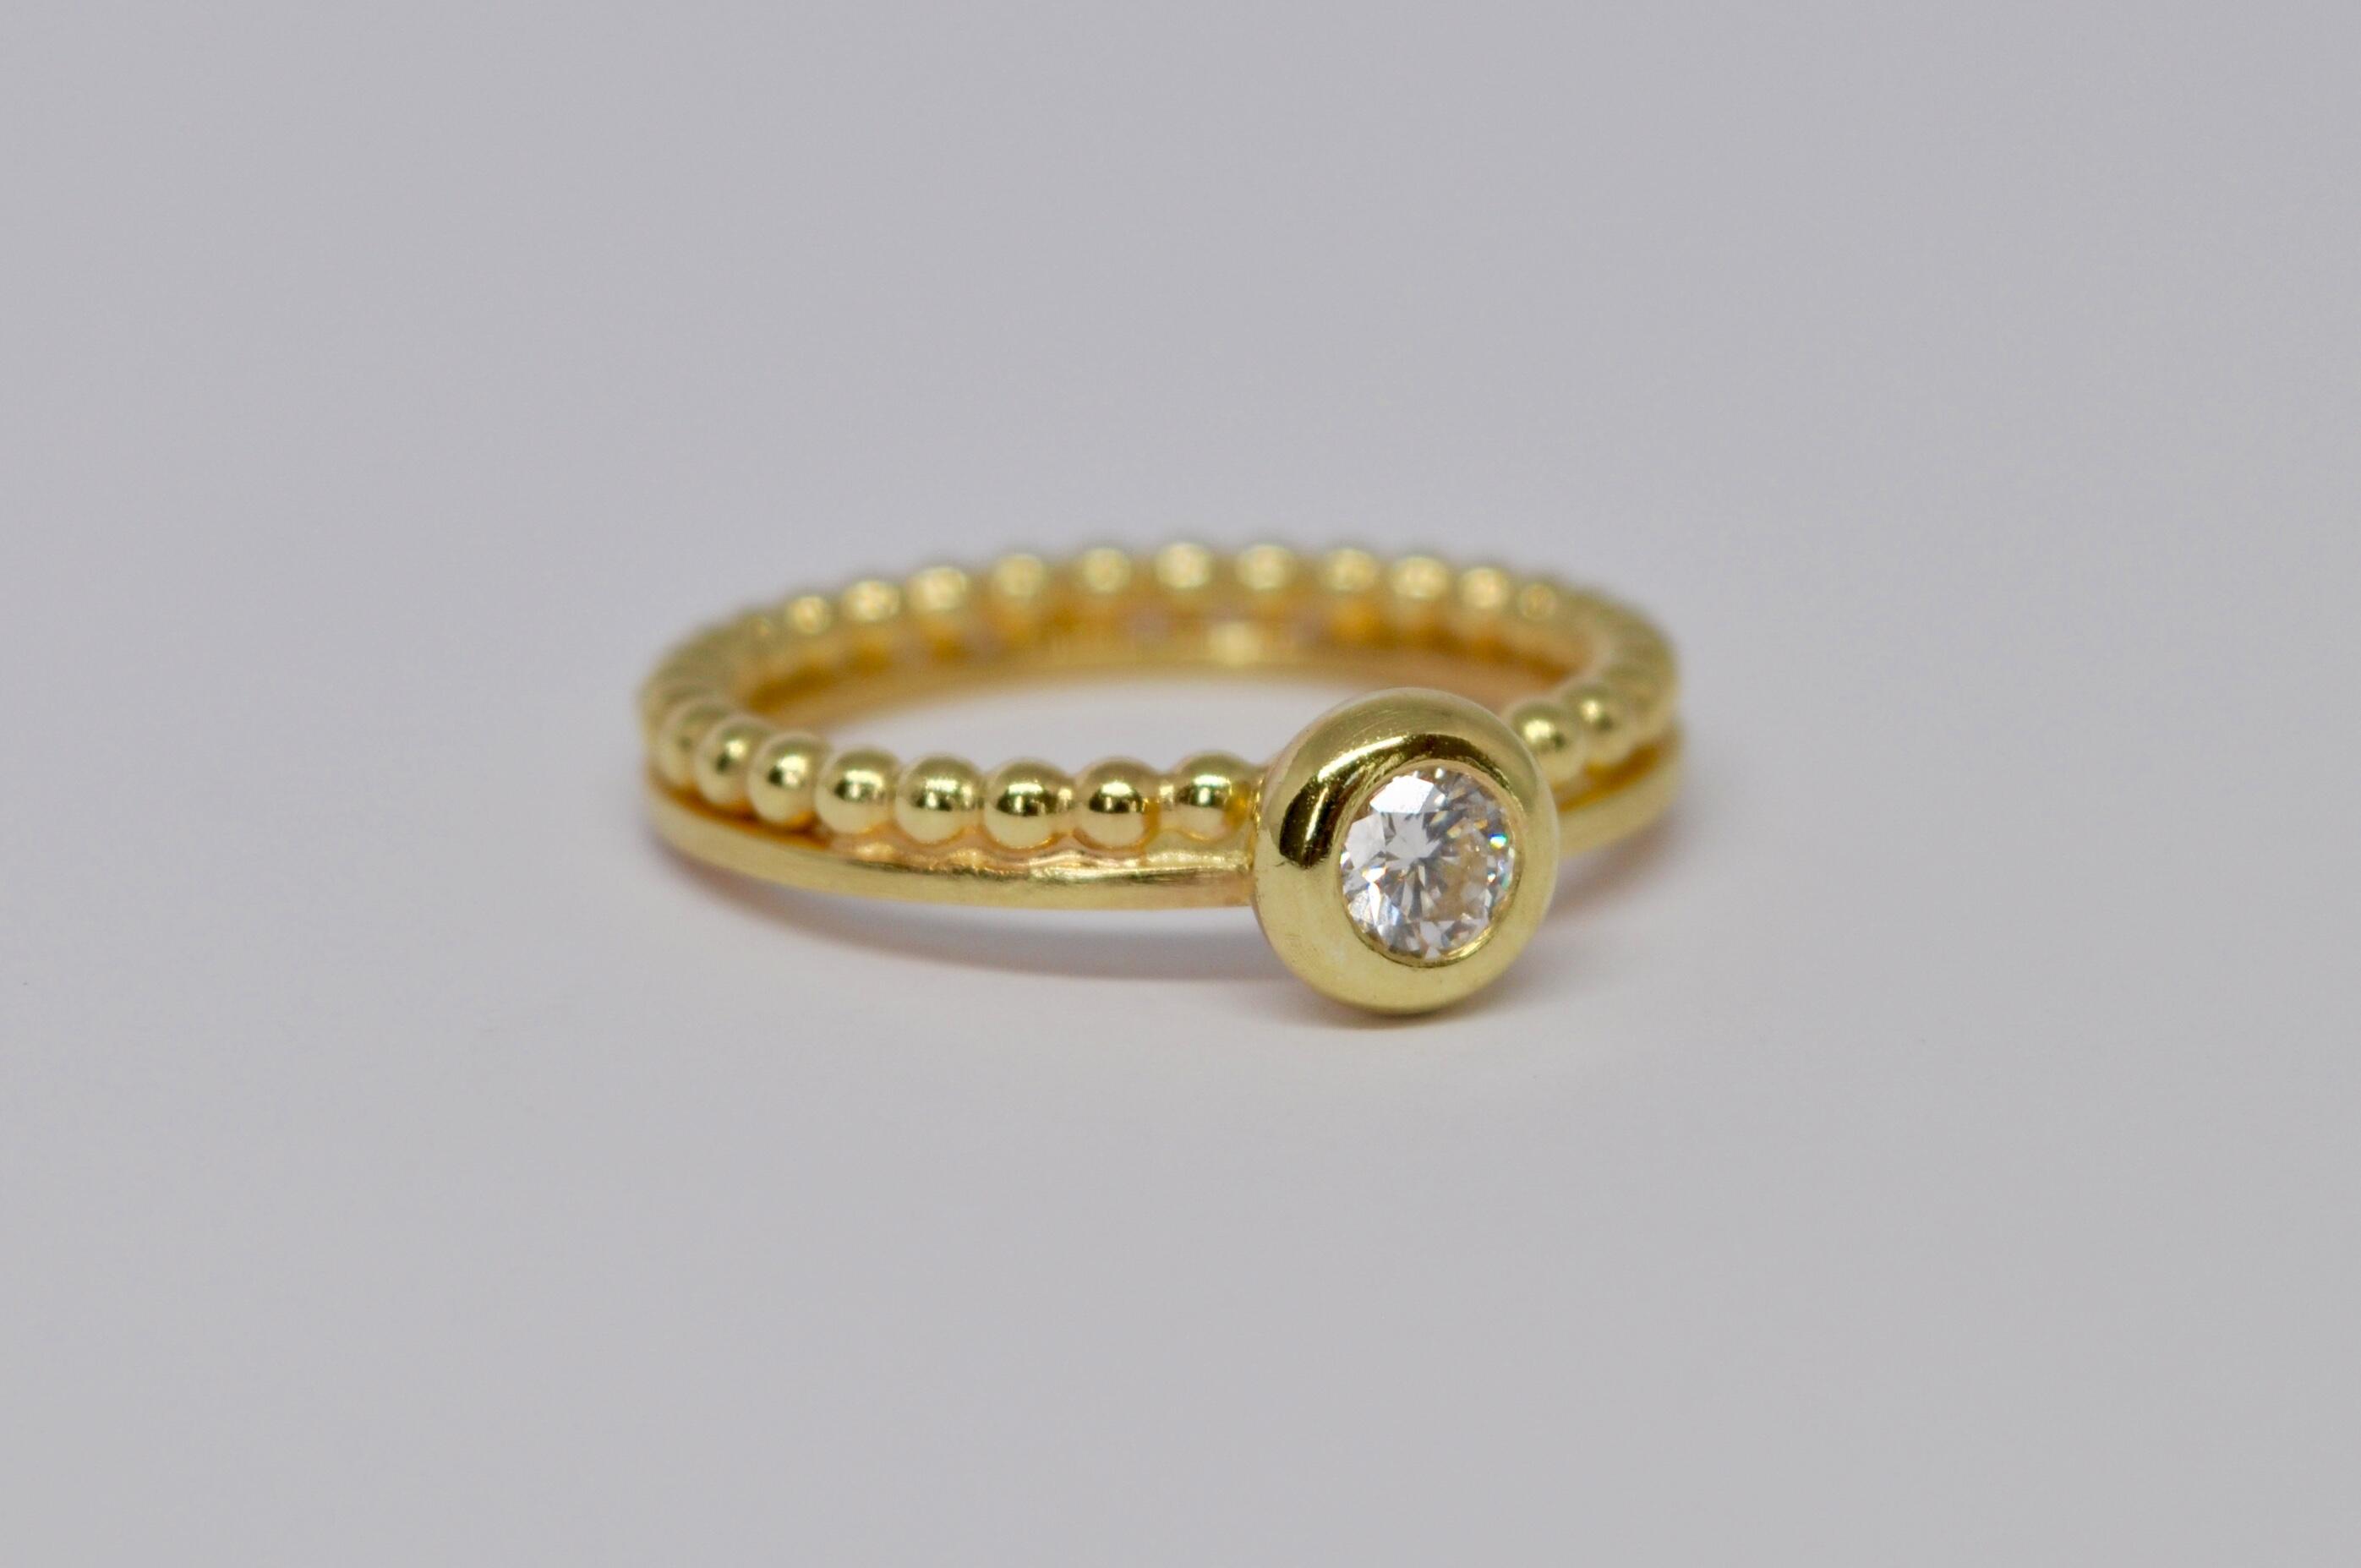 Ring in yellow gold (18 carat) and diamond